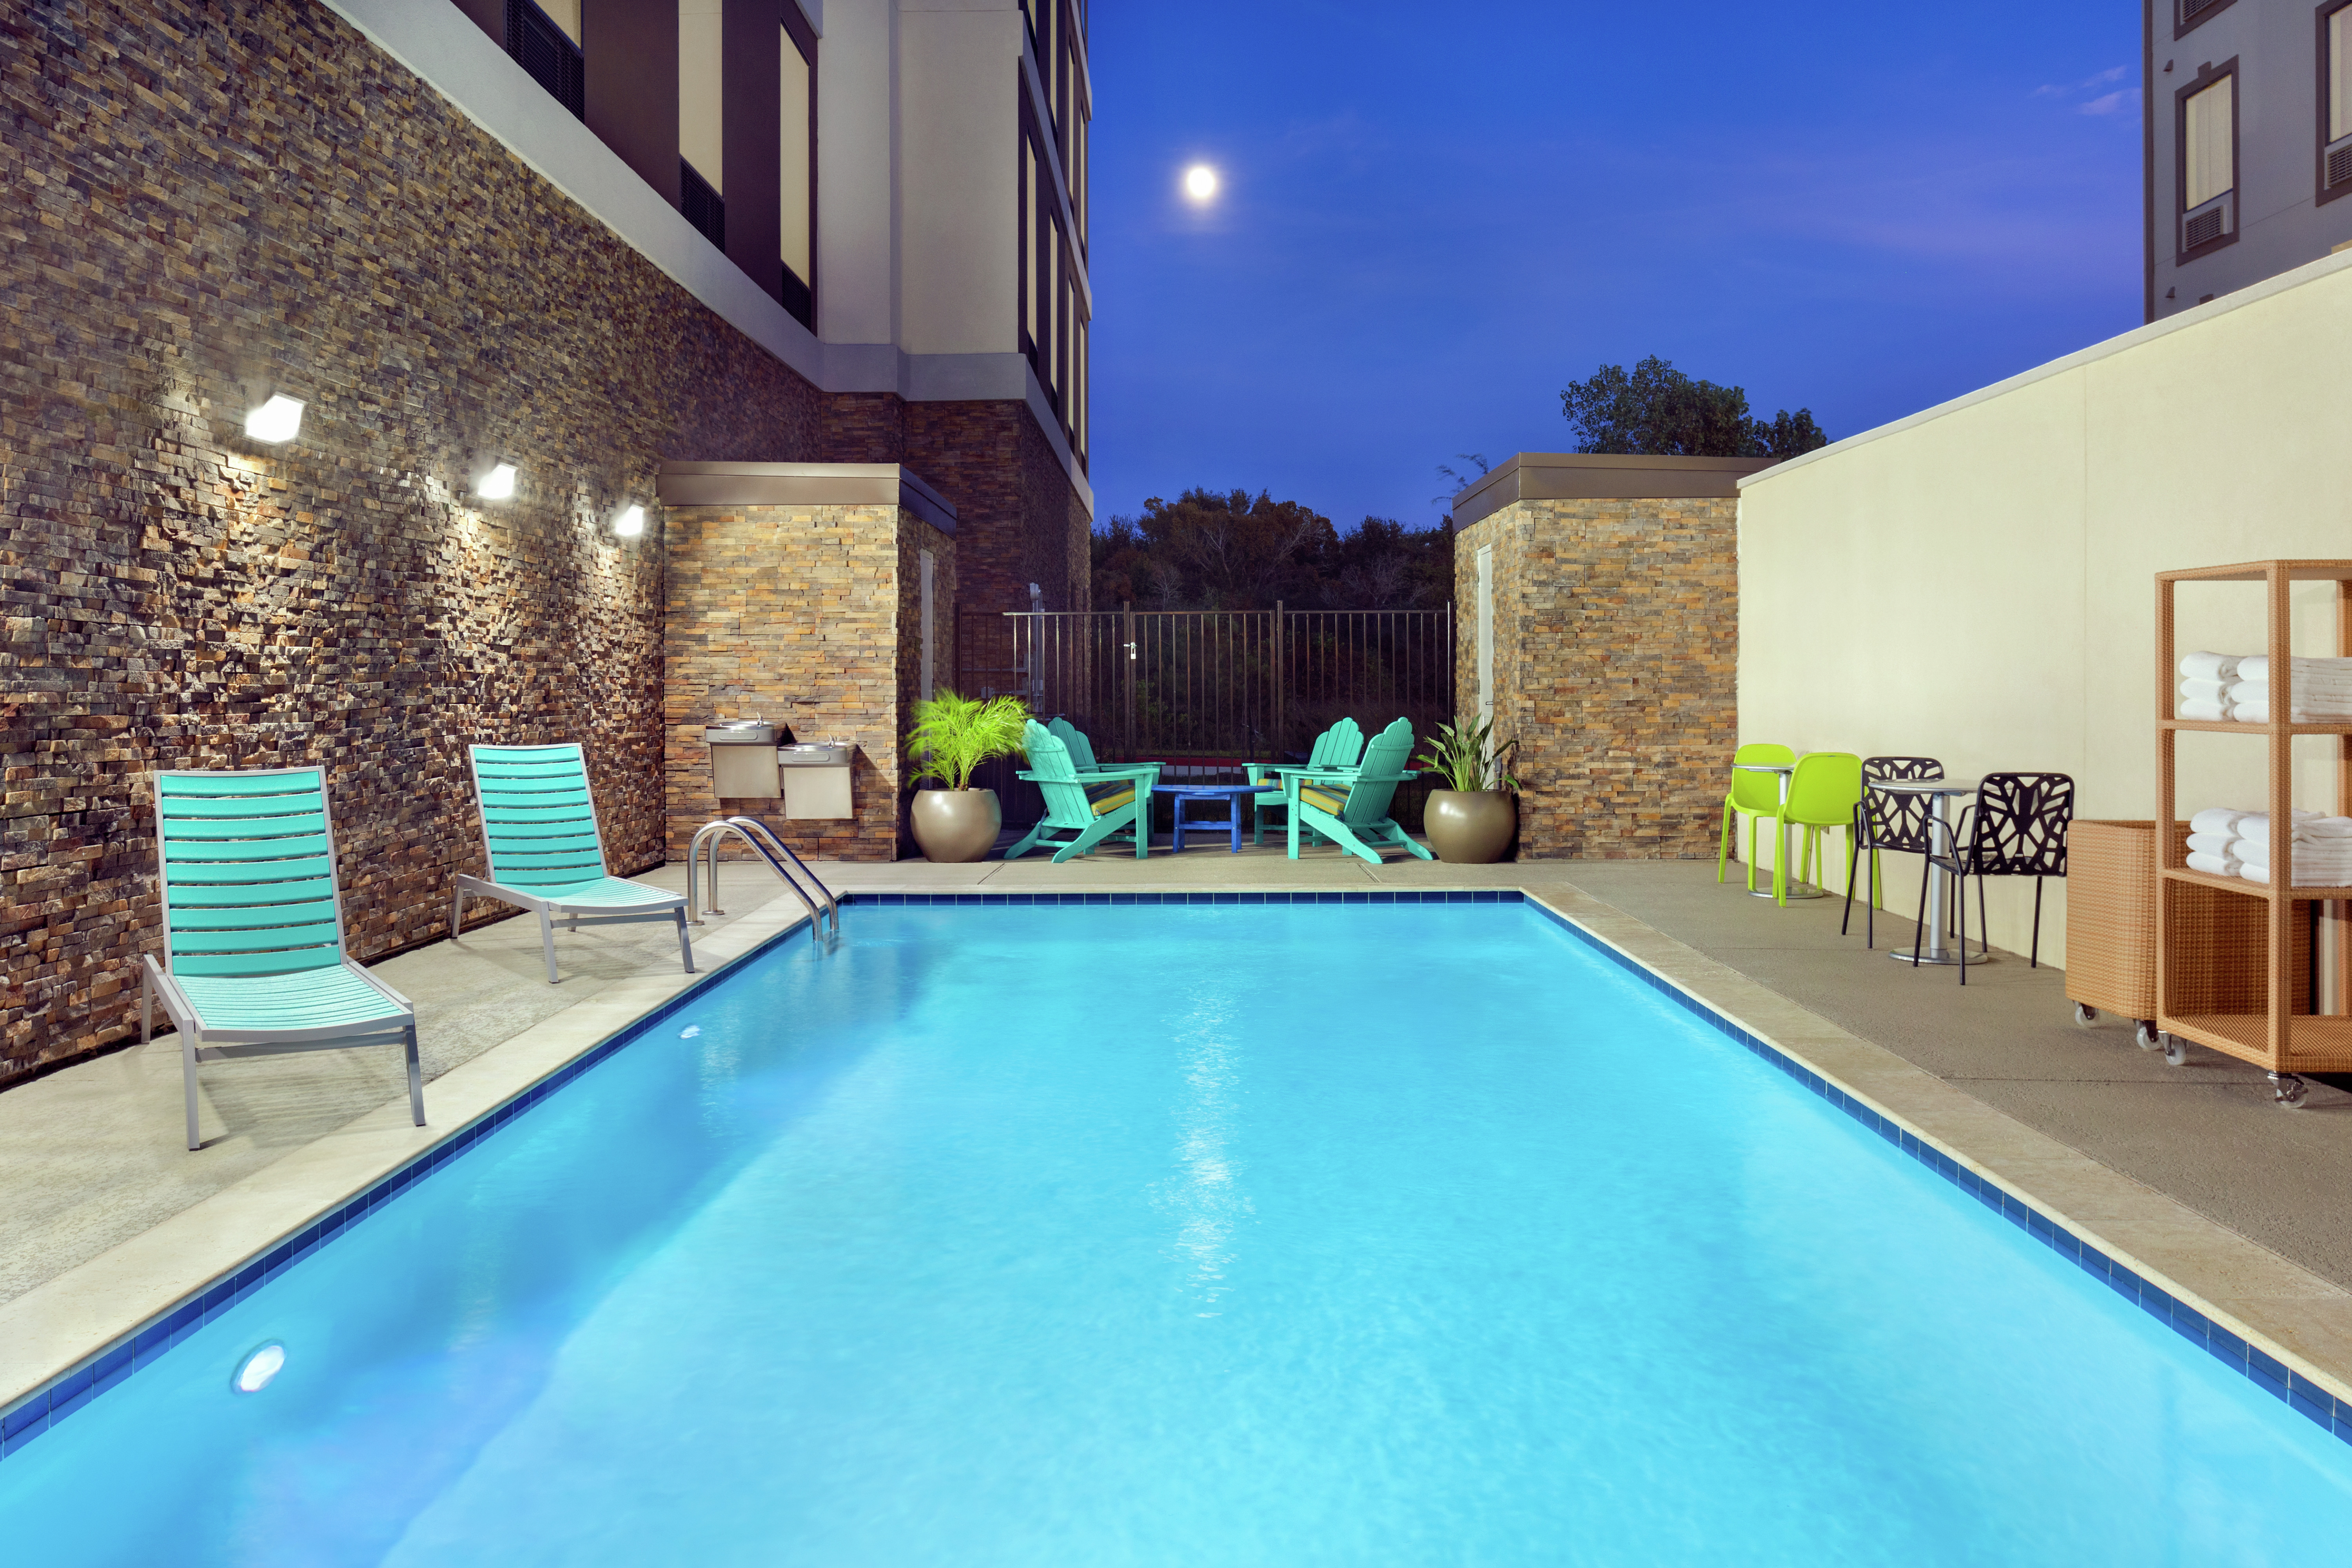 Outdoor pool at night with privacy walls,  lounge chairs, and complimentary towels.